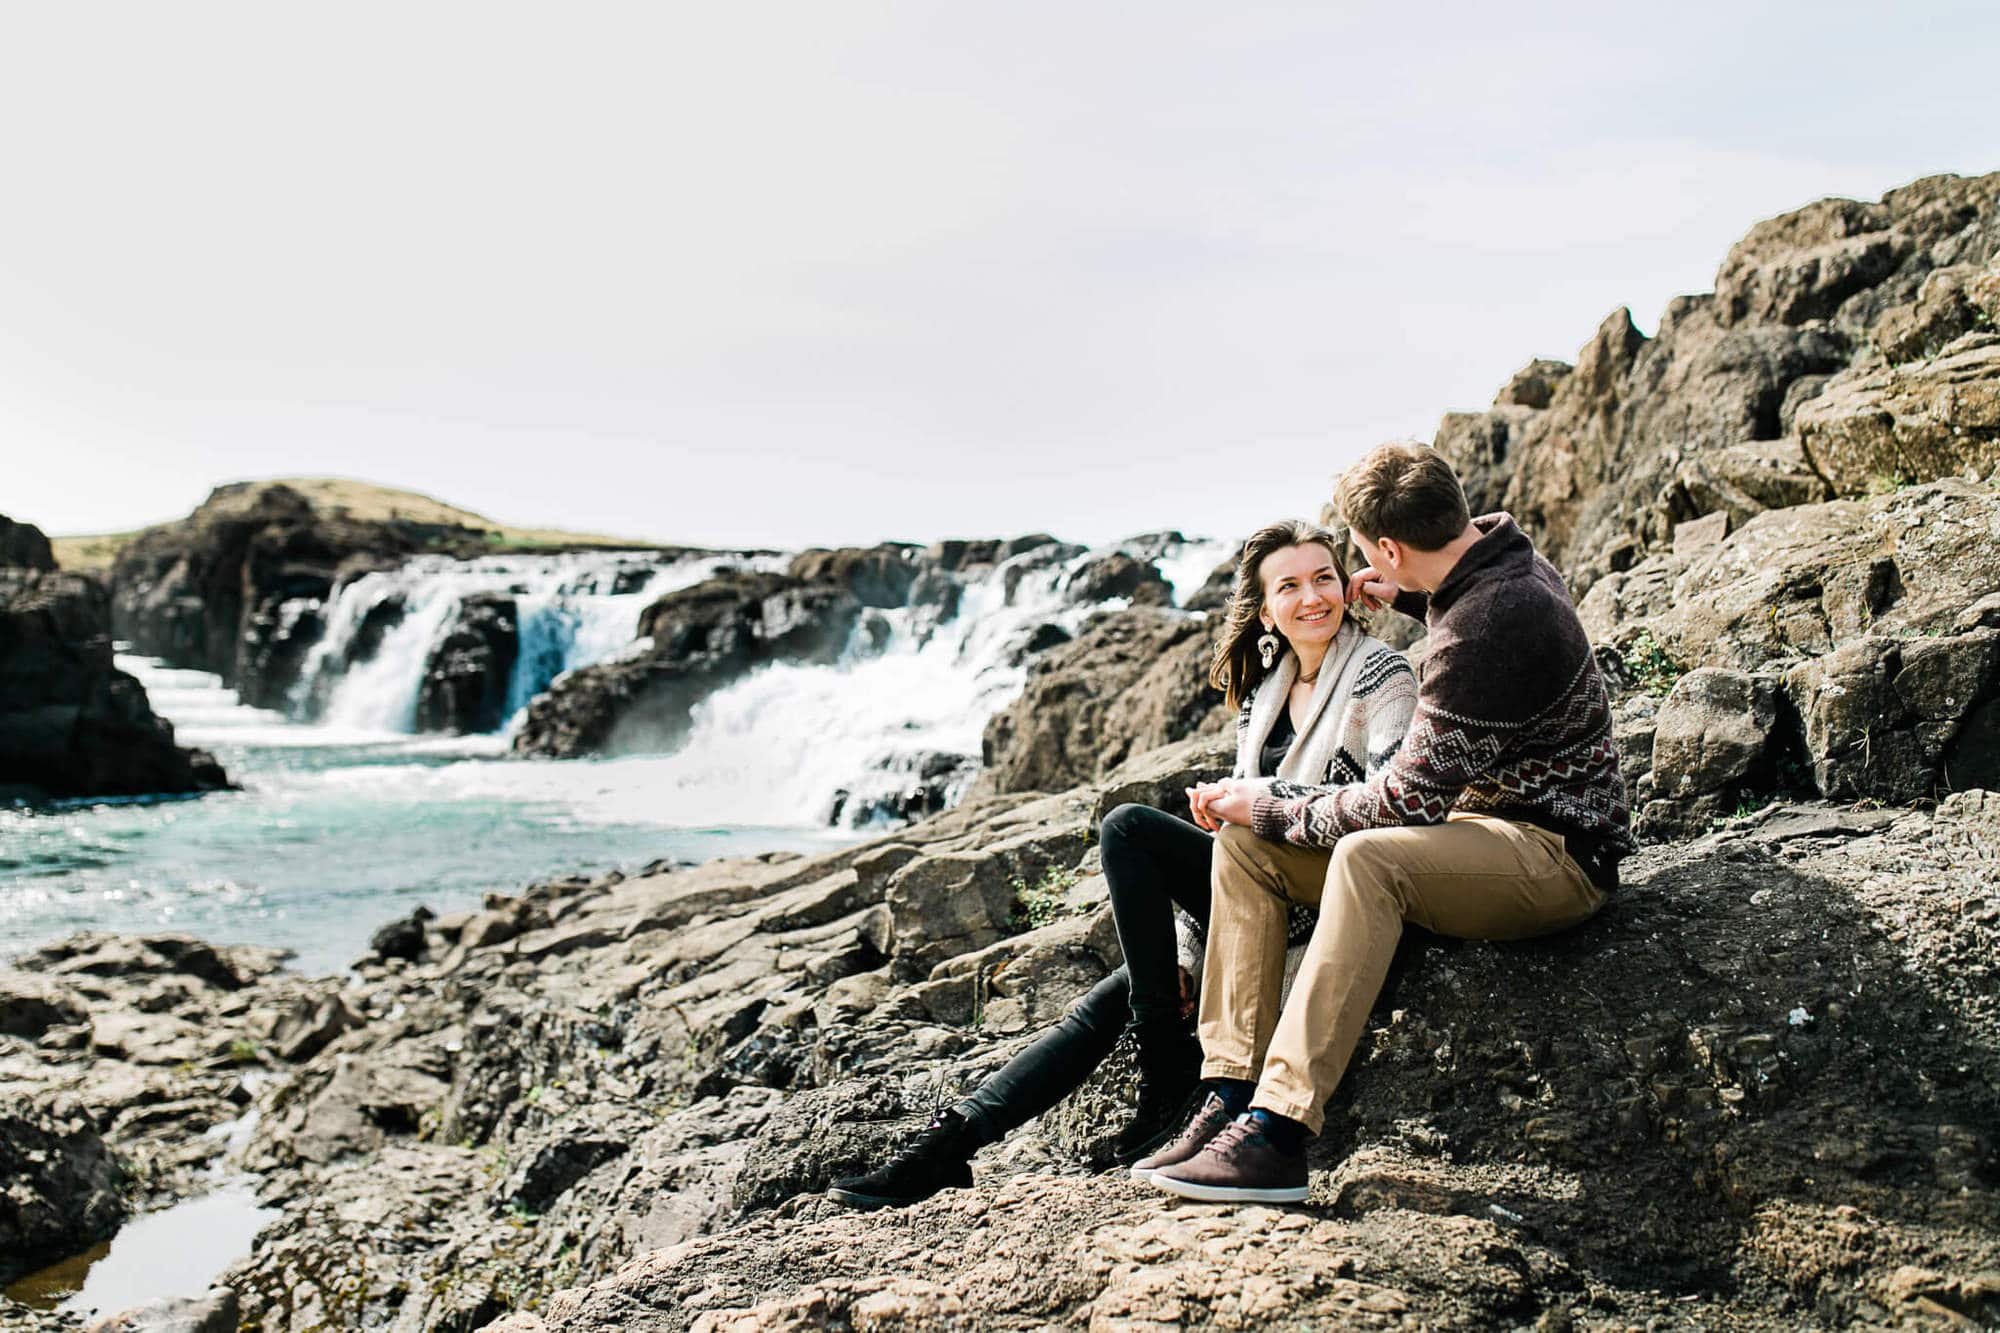 I met up with this sweet couple while we road tripped around the famous Ring Road in Iceland. Adventure and snuggles made me a very happy elopement photographer!